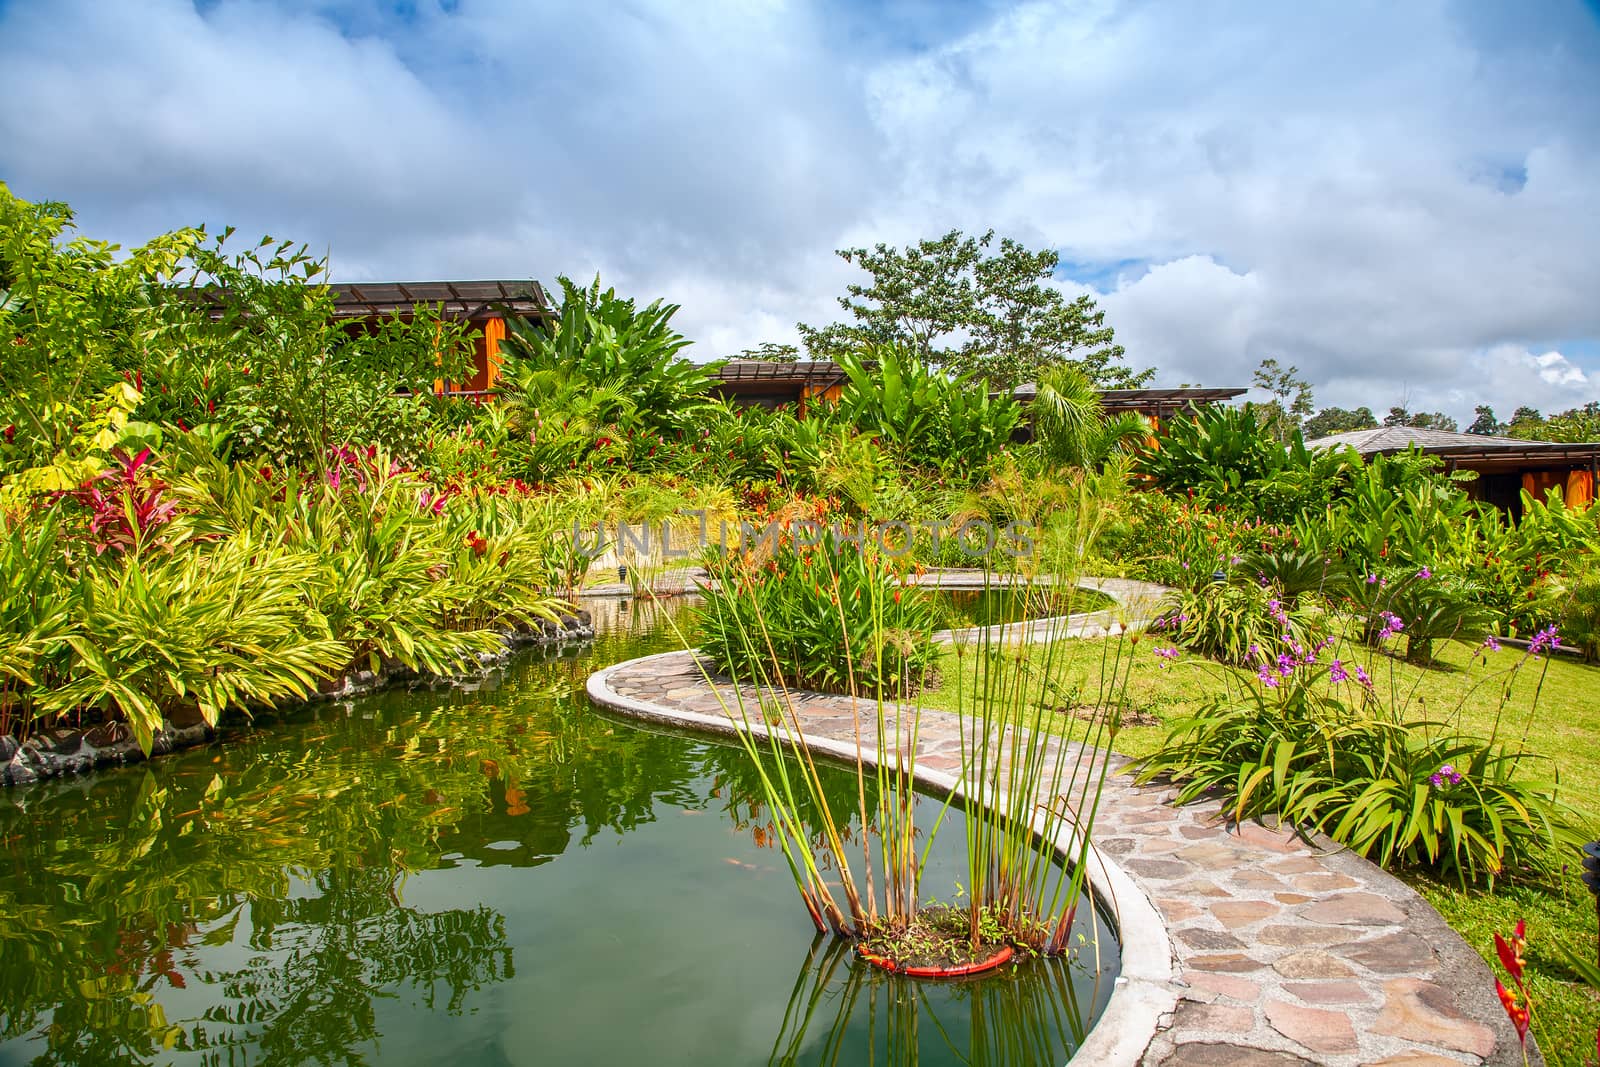 Garden with various tropical plants and flower growing in a pattern